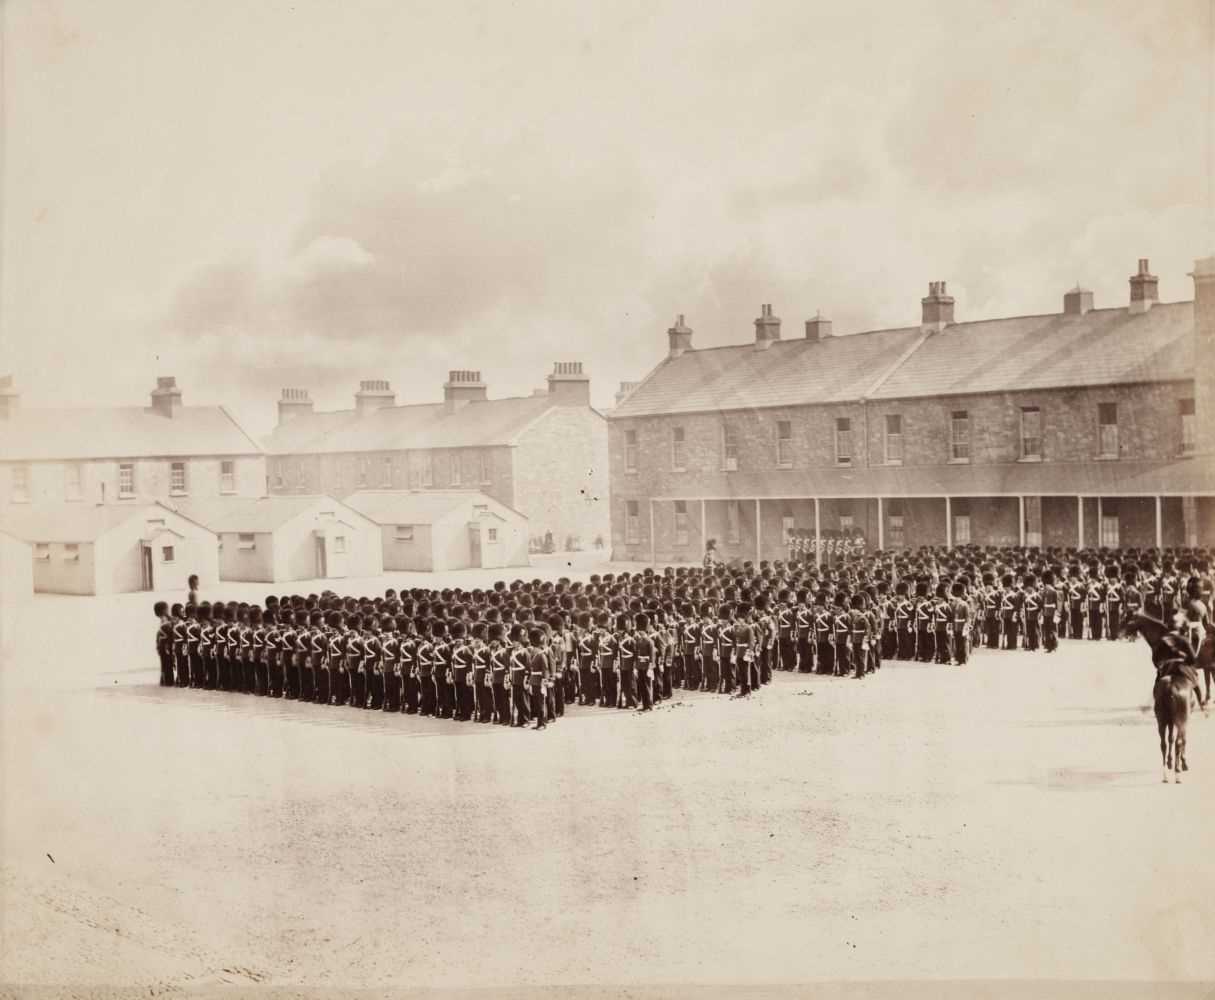 Lot 10 - Attributed to Roger Fenton (1816-1869). Military Parade, with an officer on horseback